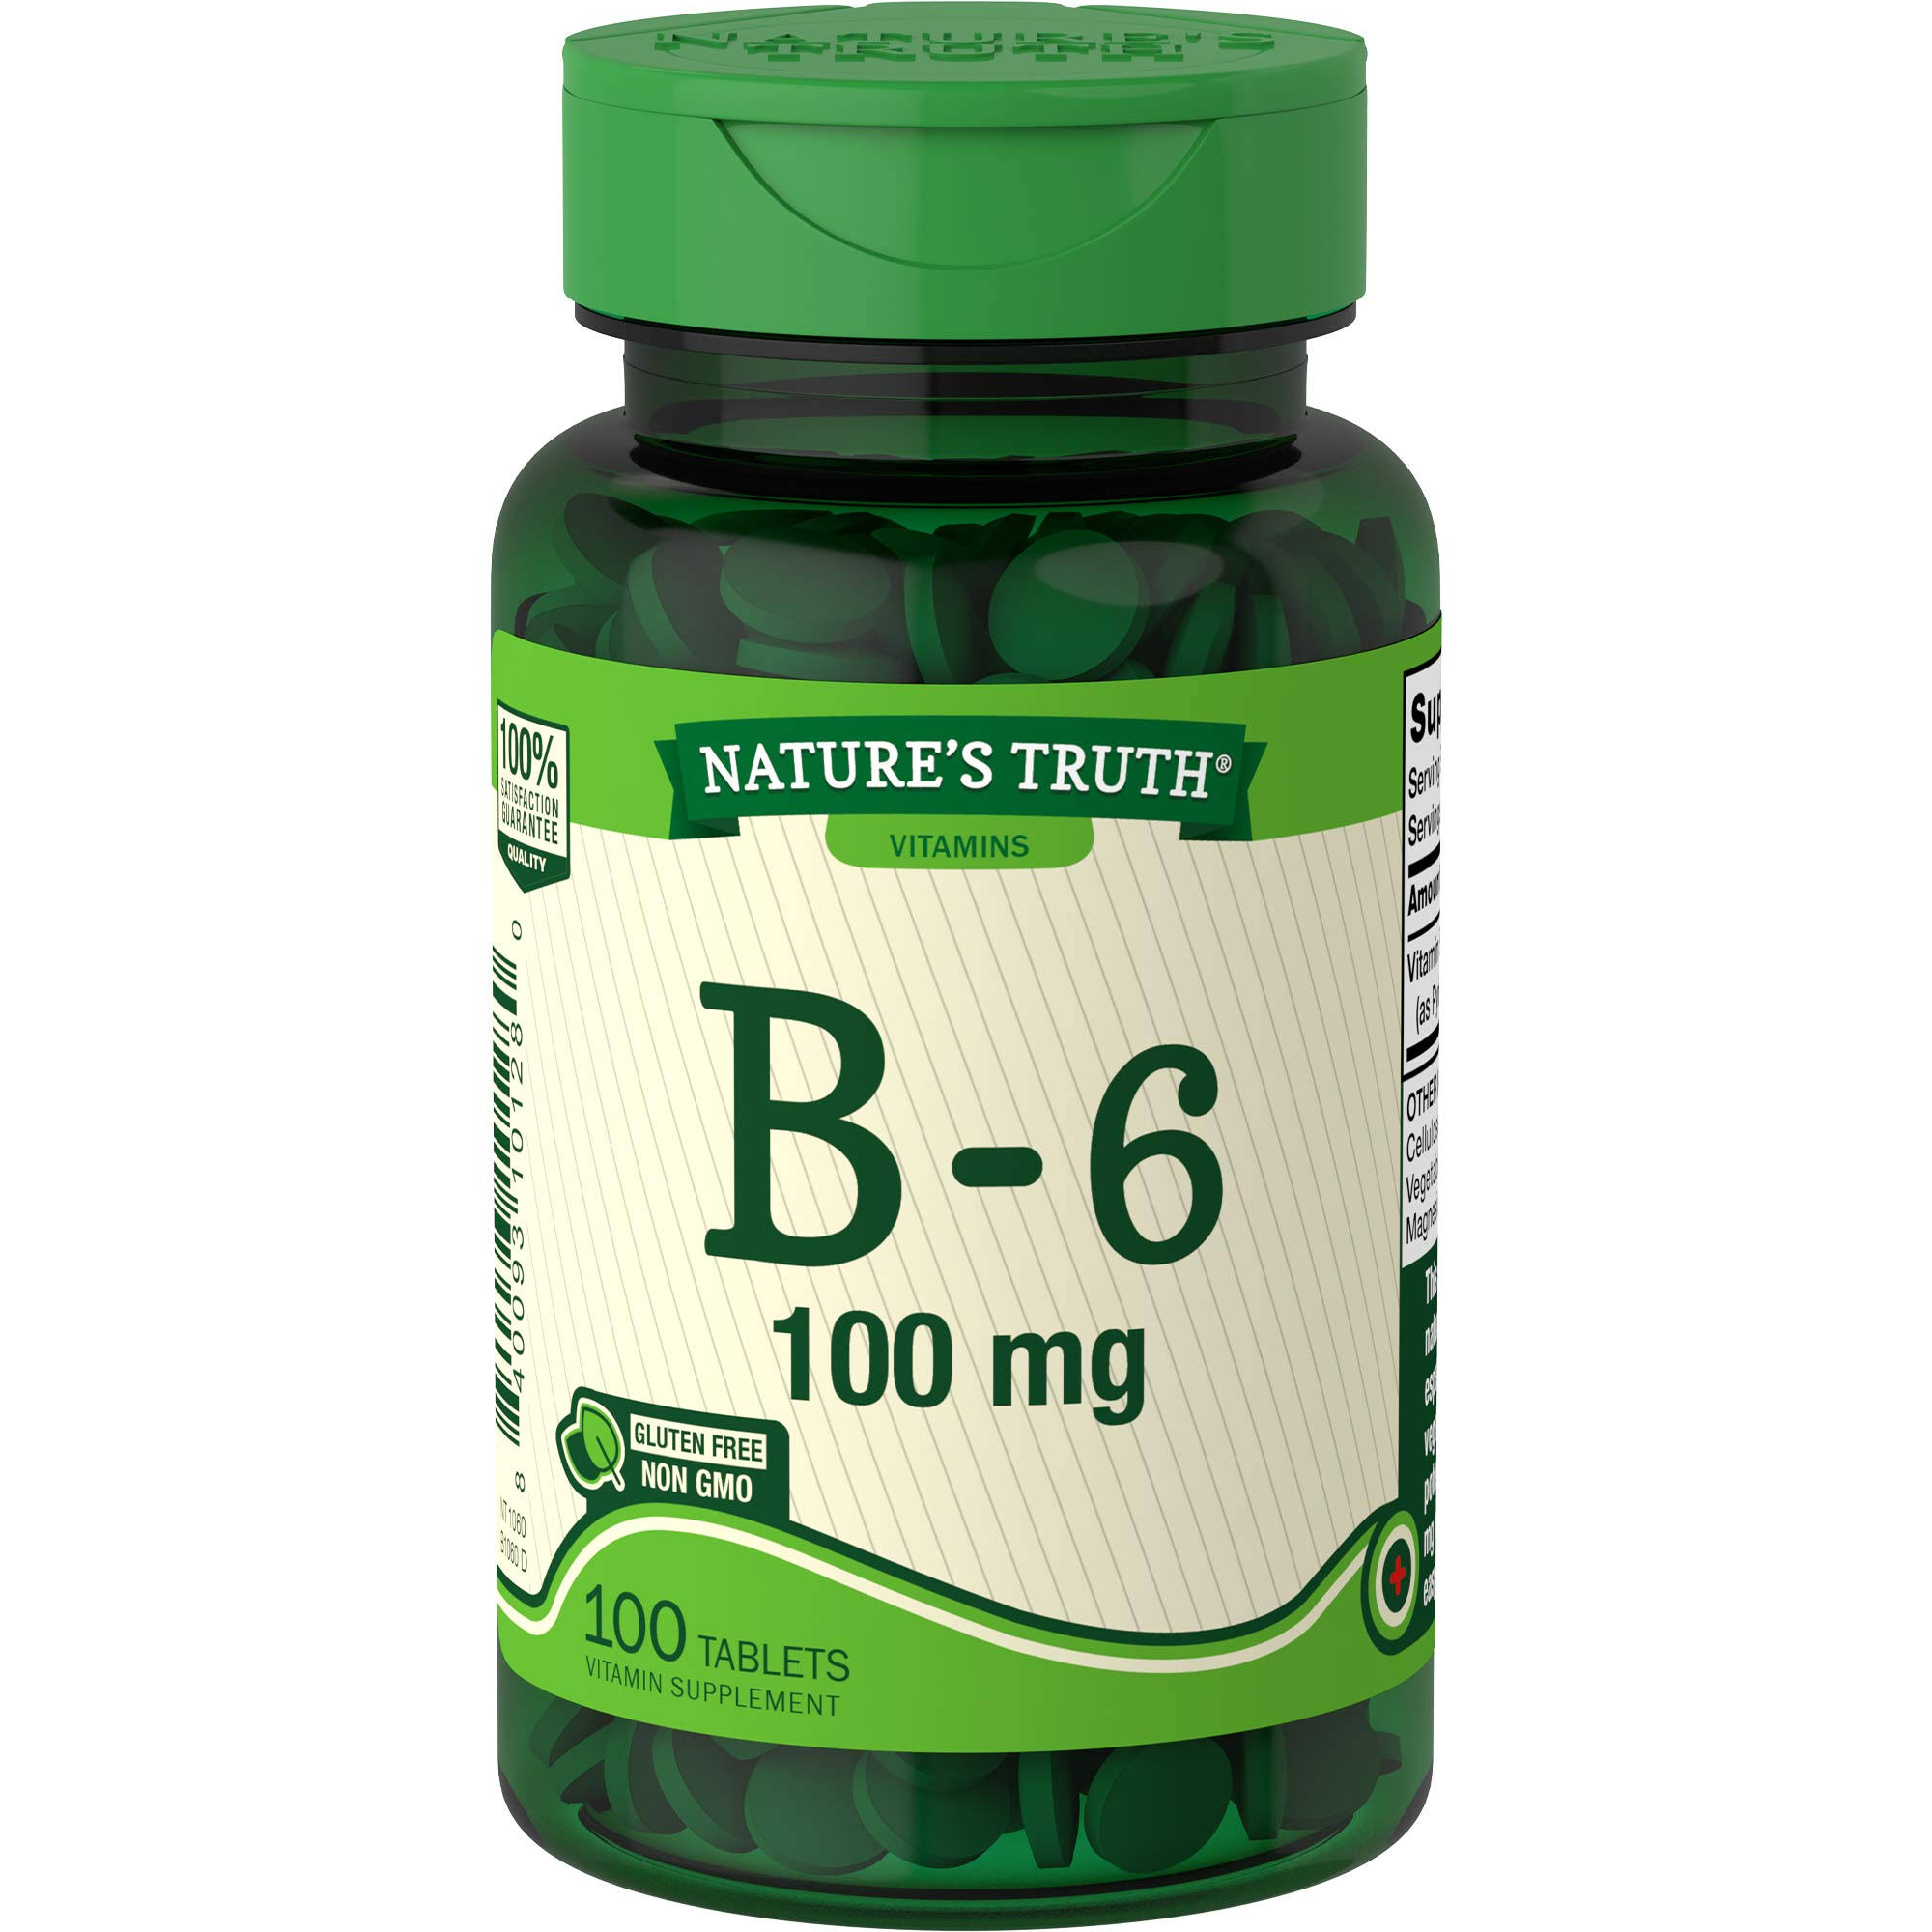 Nature's Truth B-6 100 mg - 100 Tablets